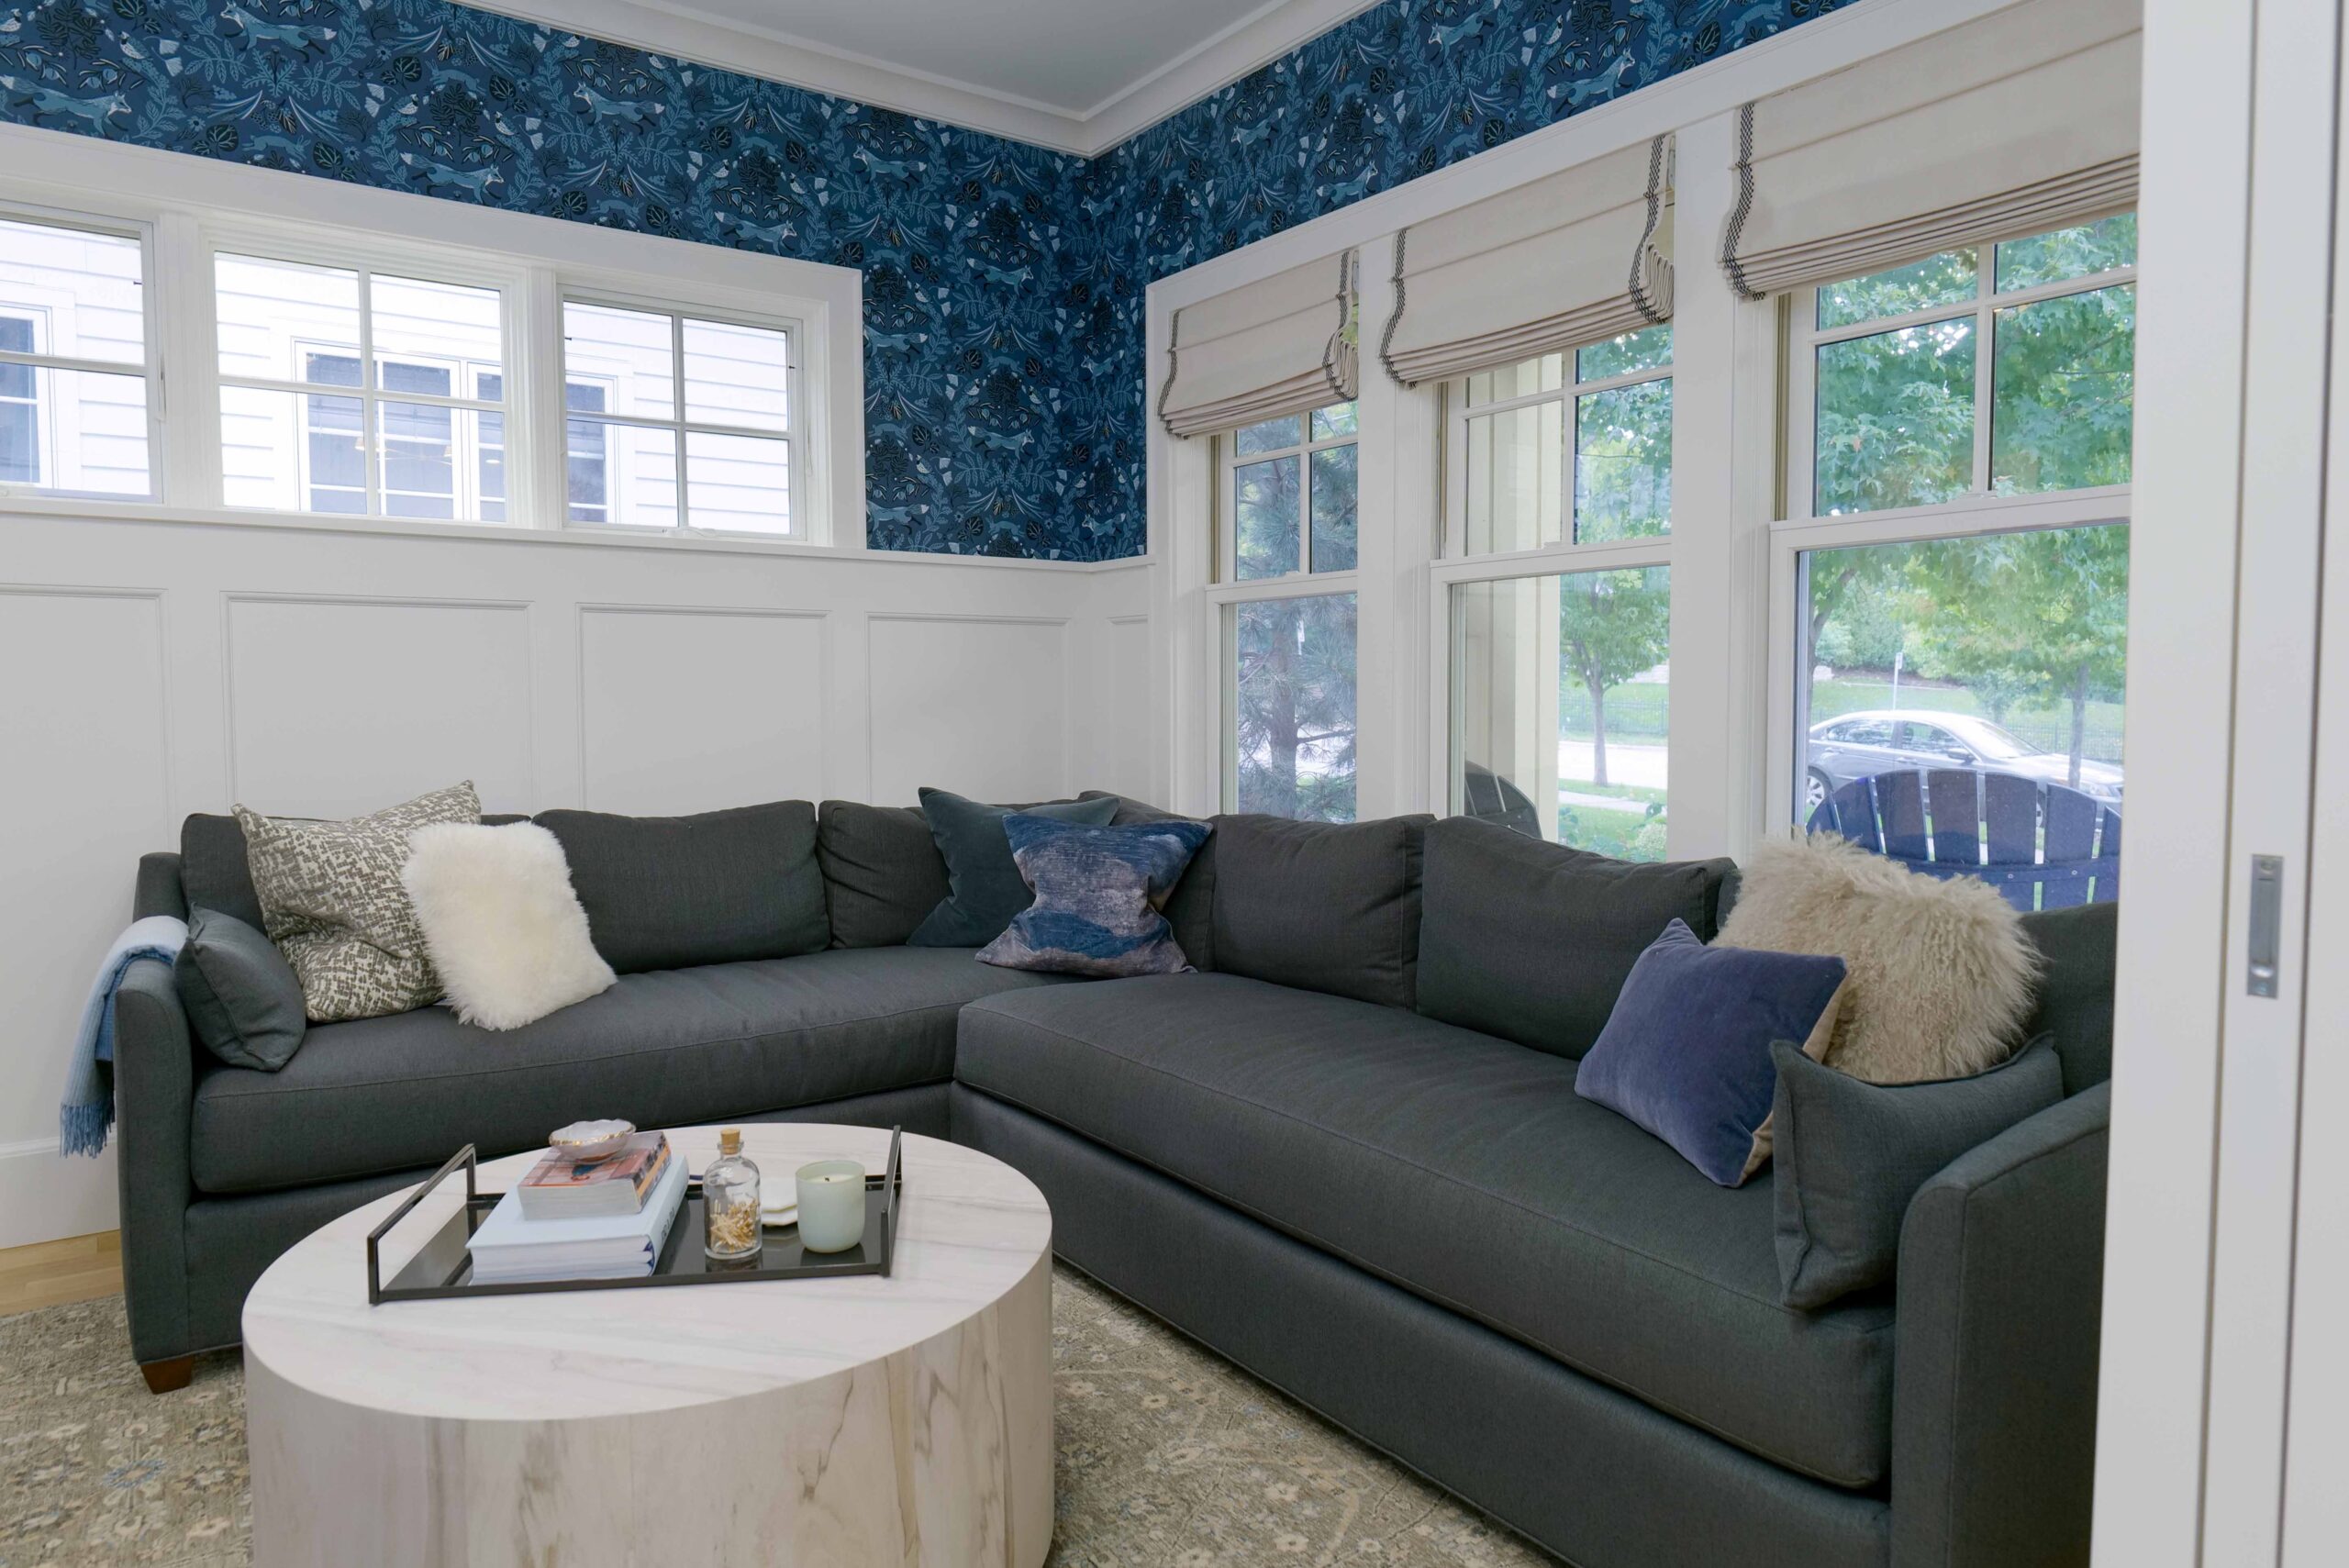 A living room with a dark gray sectional sofa, various throw pillows, a round marble coffee table, and blue patterned wallpaper above white wainscoting. The Upton Avenue Fire Remodel boasts large windows with Roman shades in the background.